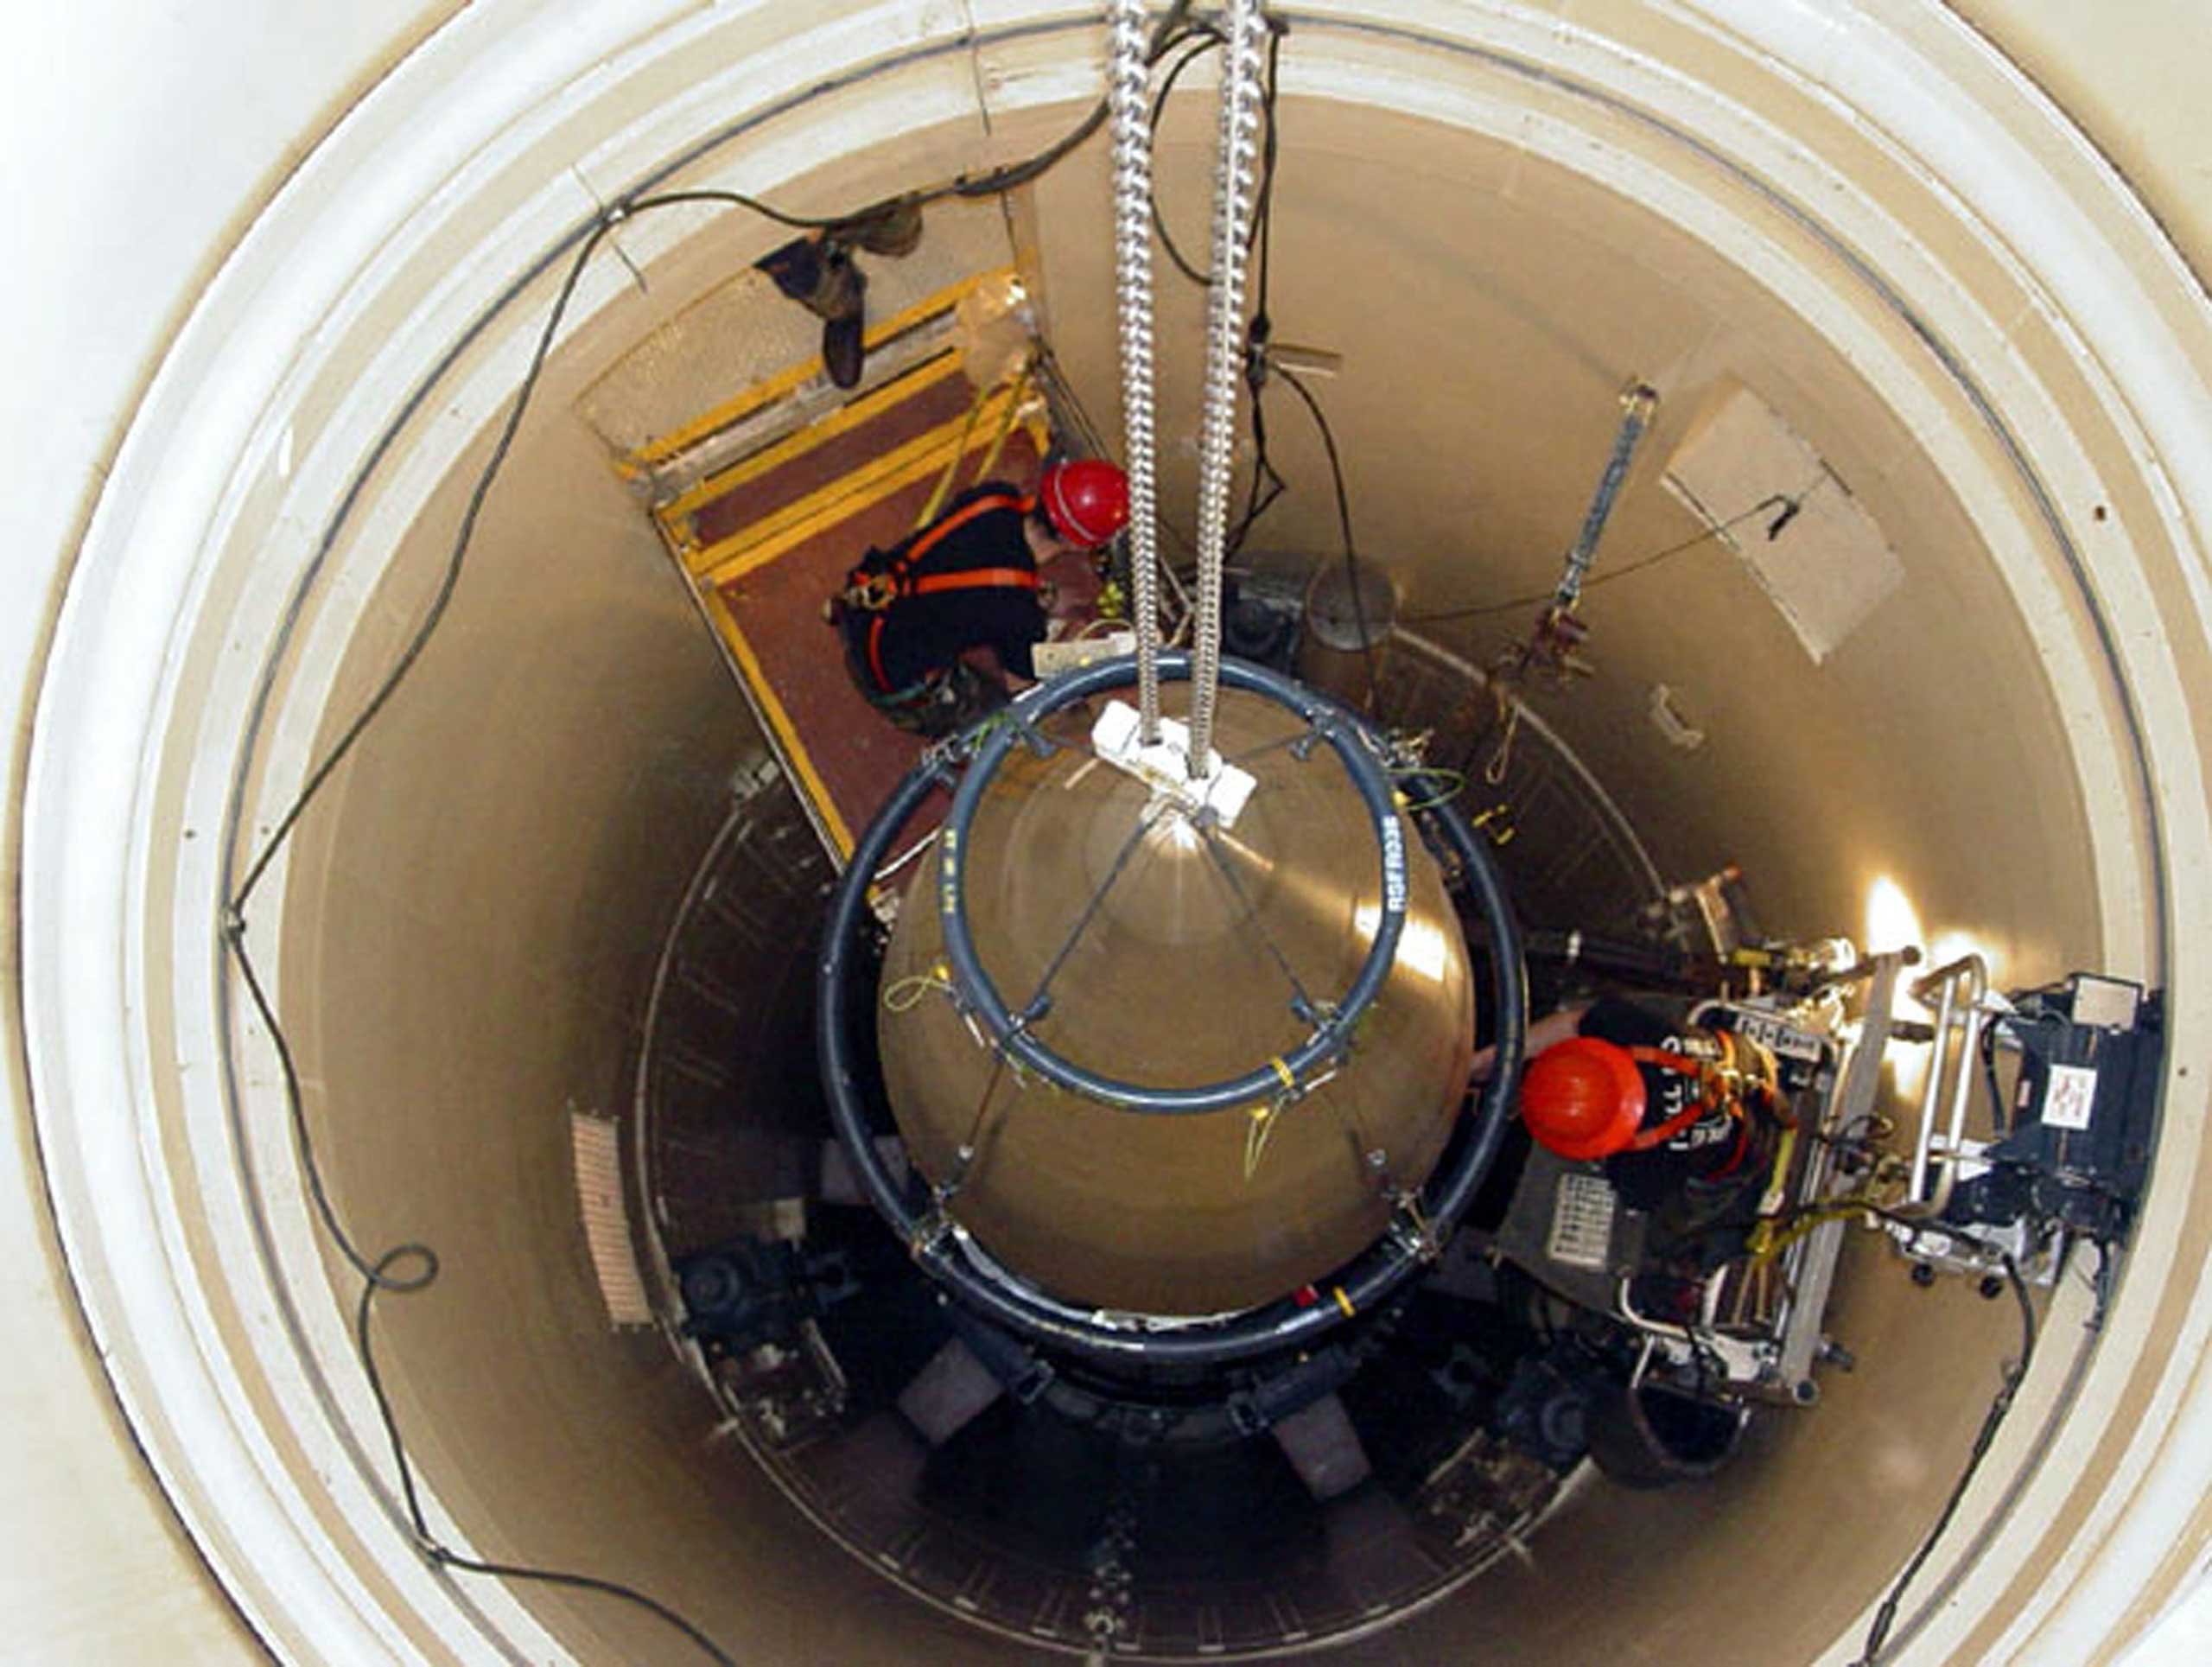 A US Air Force missile maintenance team removes the upper section of an intercontinental ballistic missile with a nuclear warhead in an undated USAF photo at Malmstrom Air Force Base, Montana.